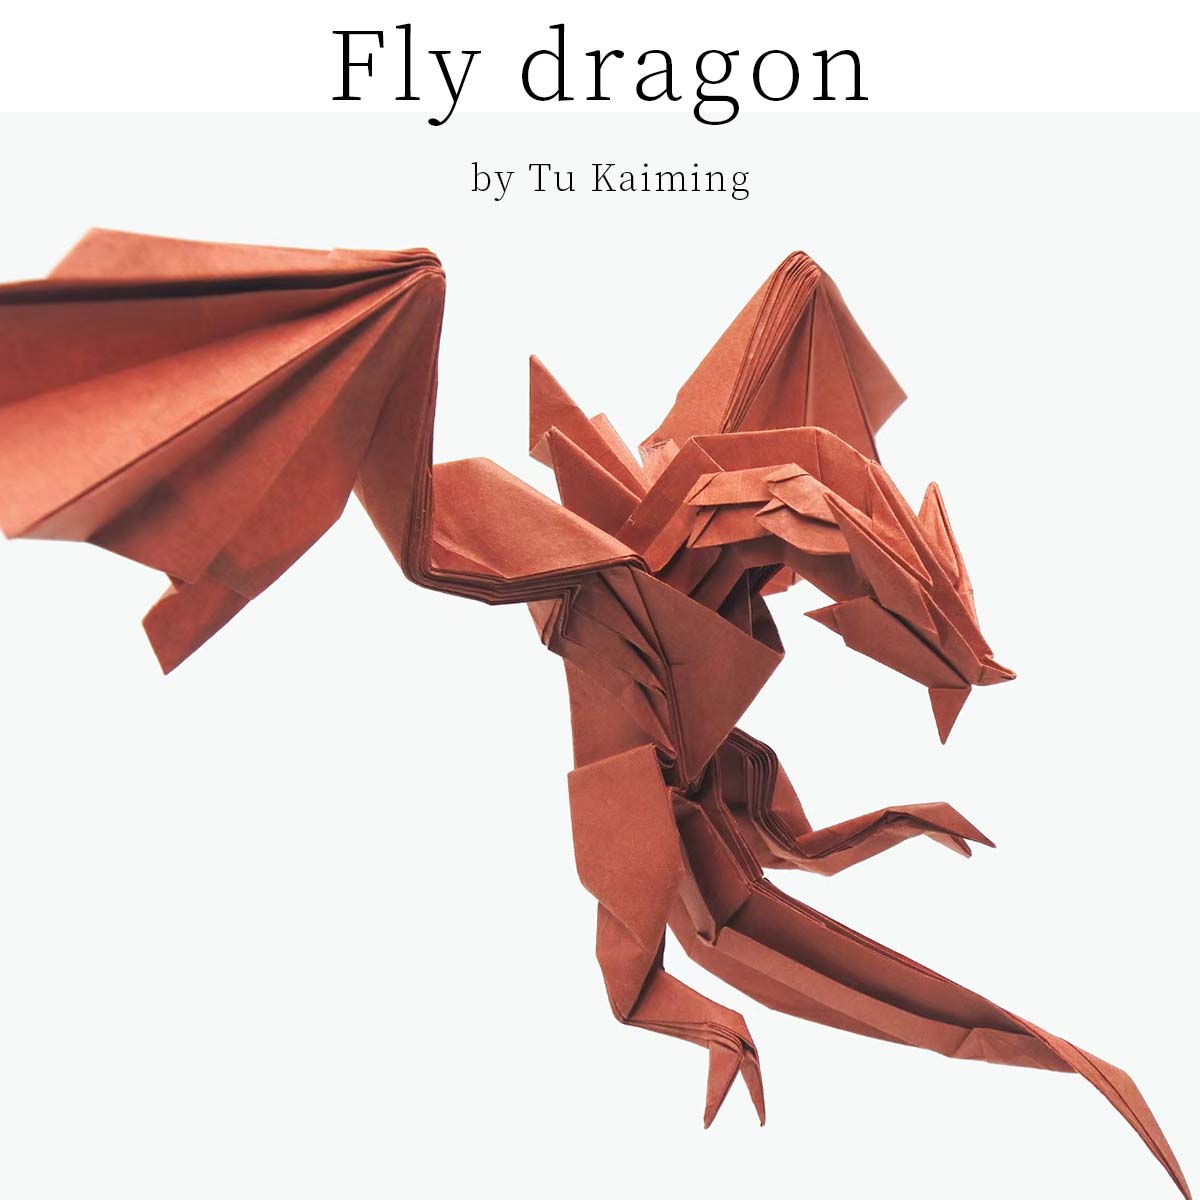 Flying Dragon  pdf file photodiagrams step  by step